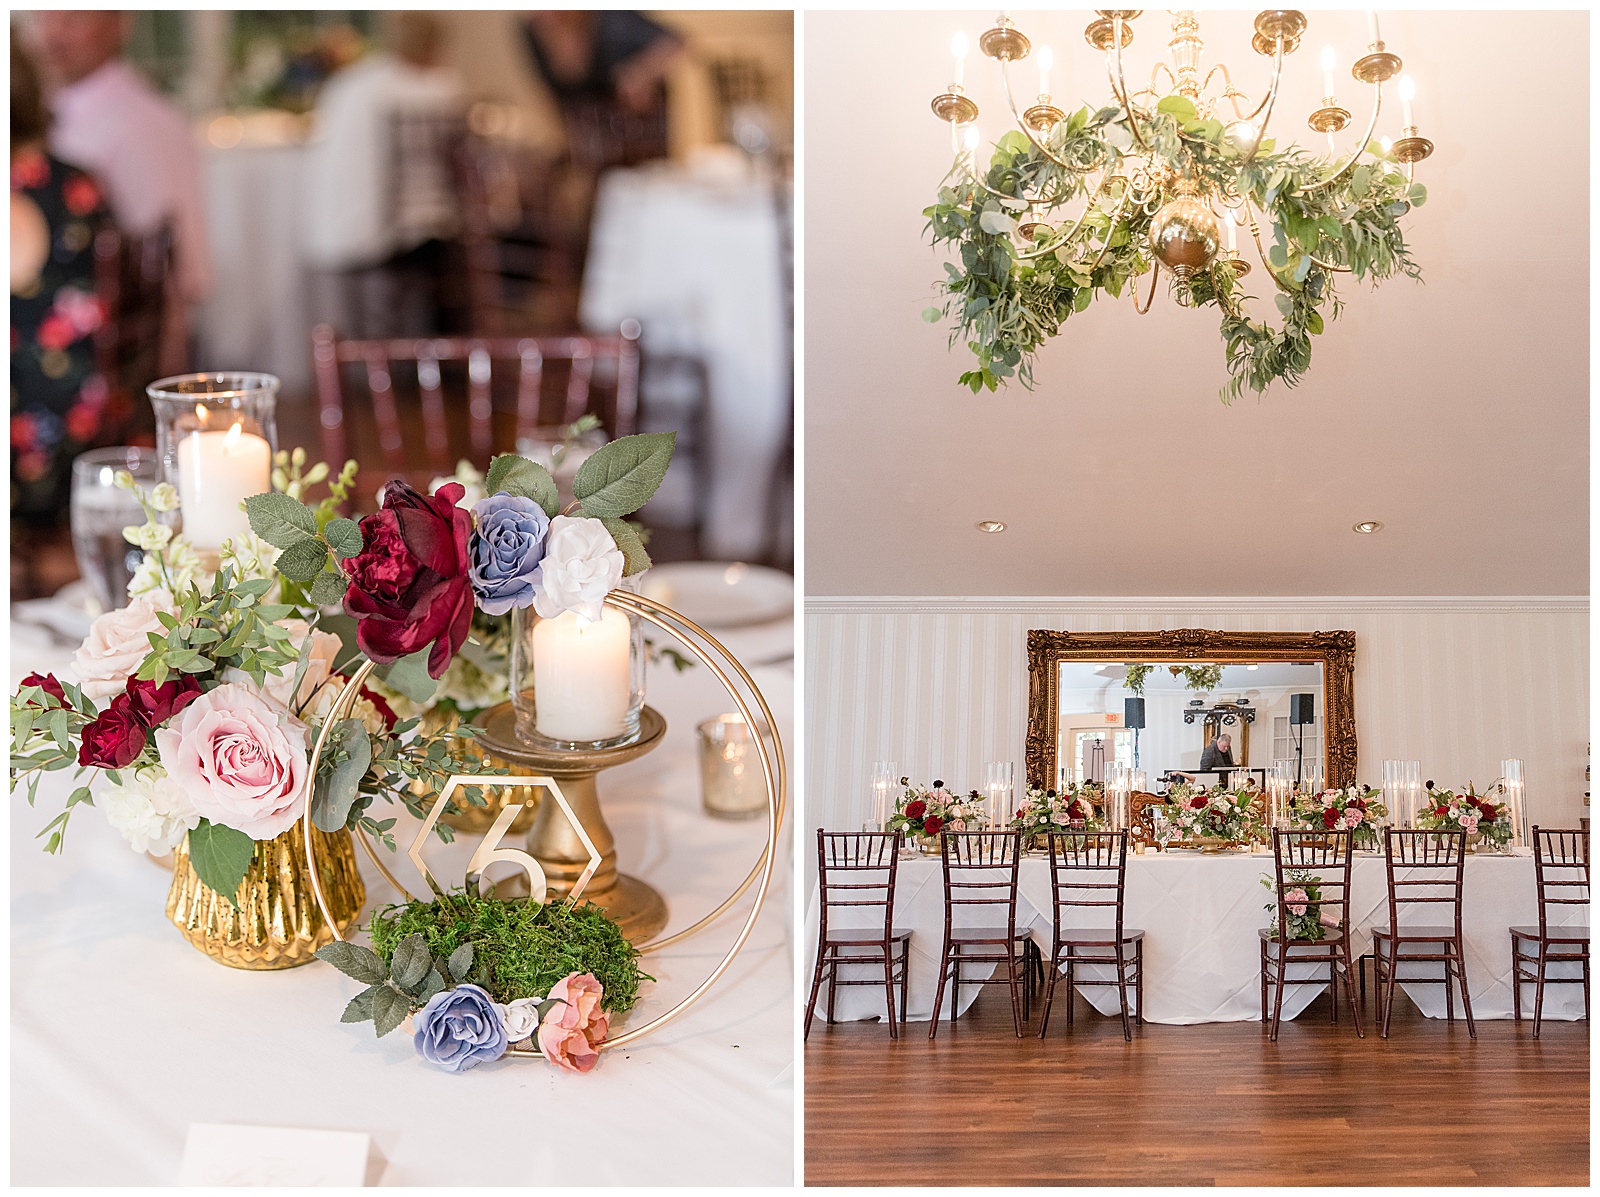 indoor reception beautifully decorated with flowers displayed and wooden chairs at tables